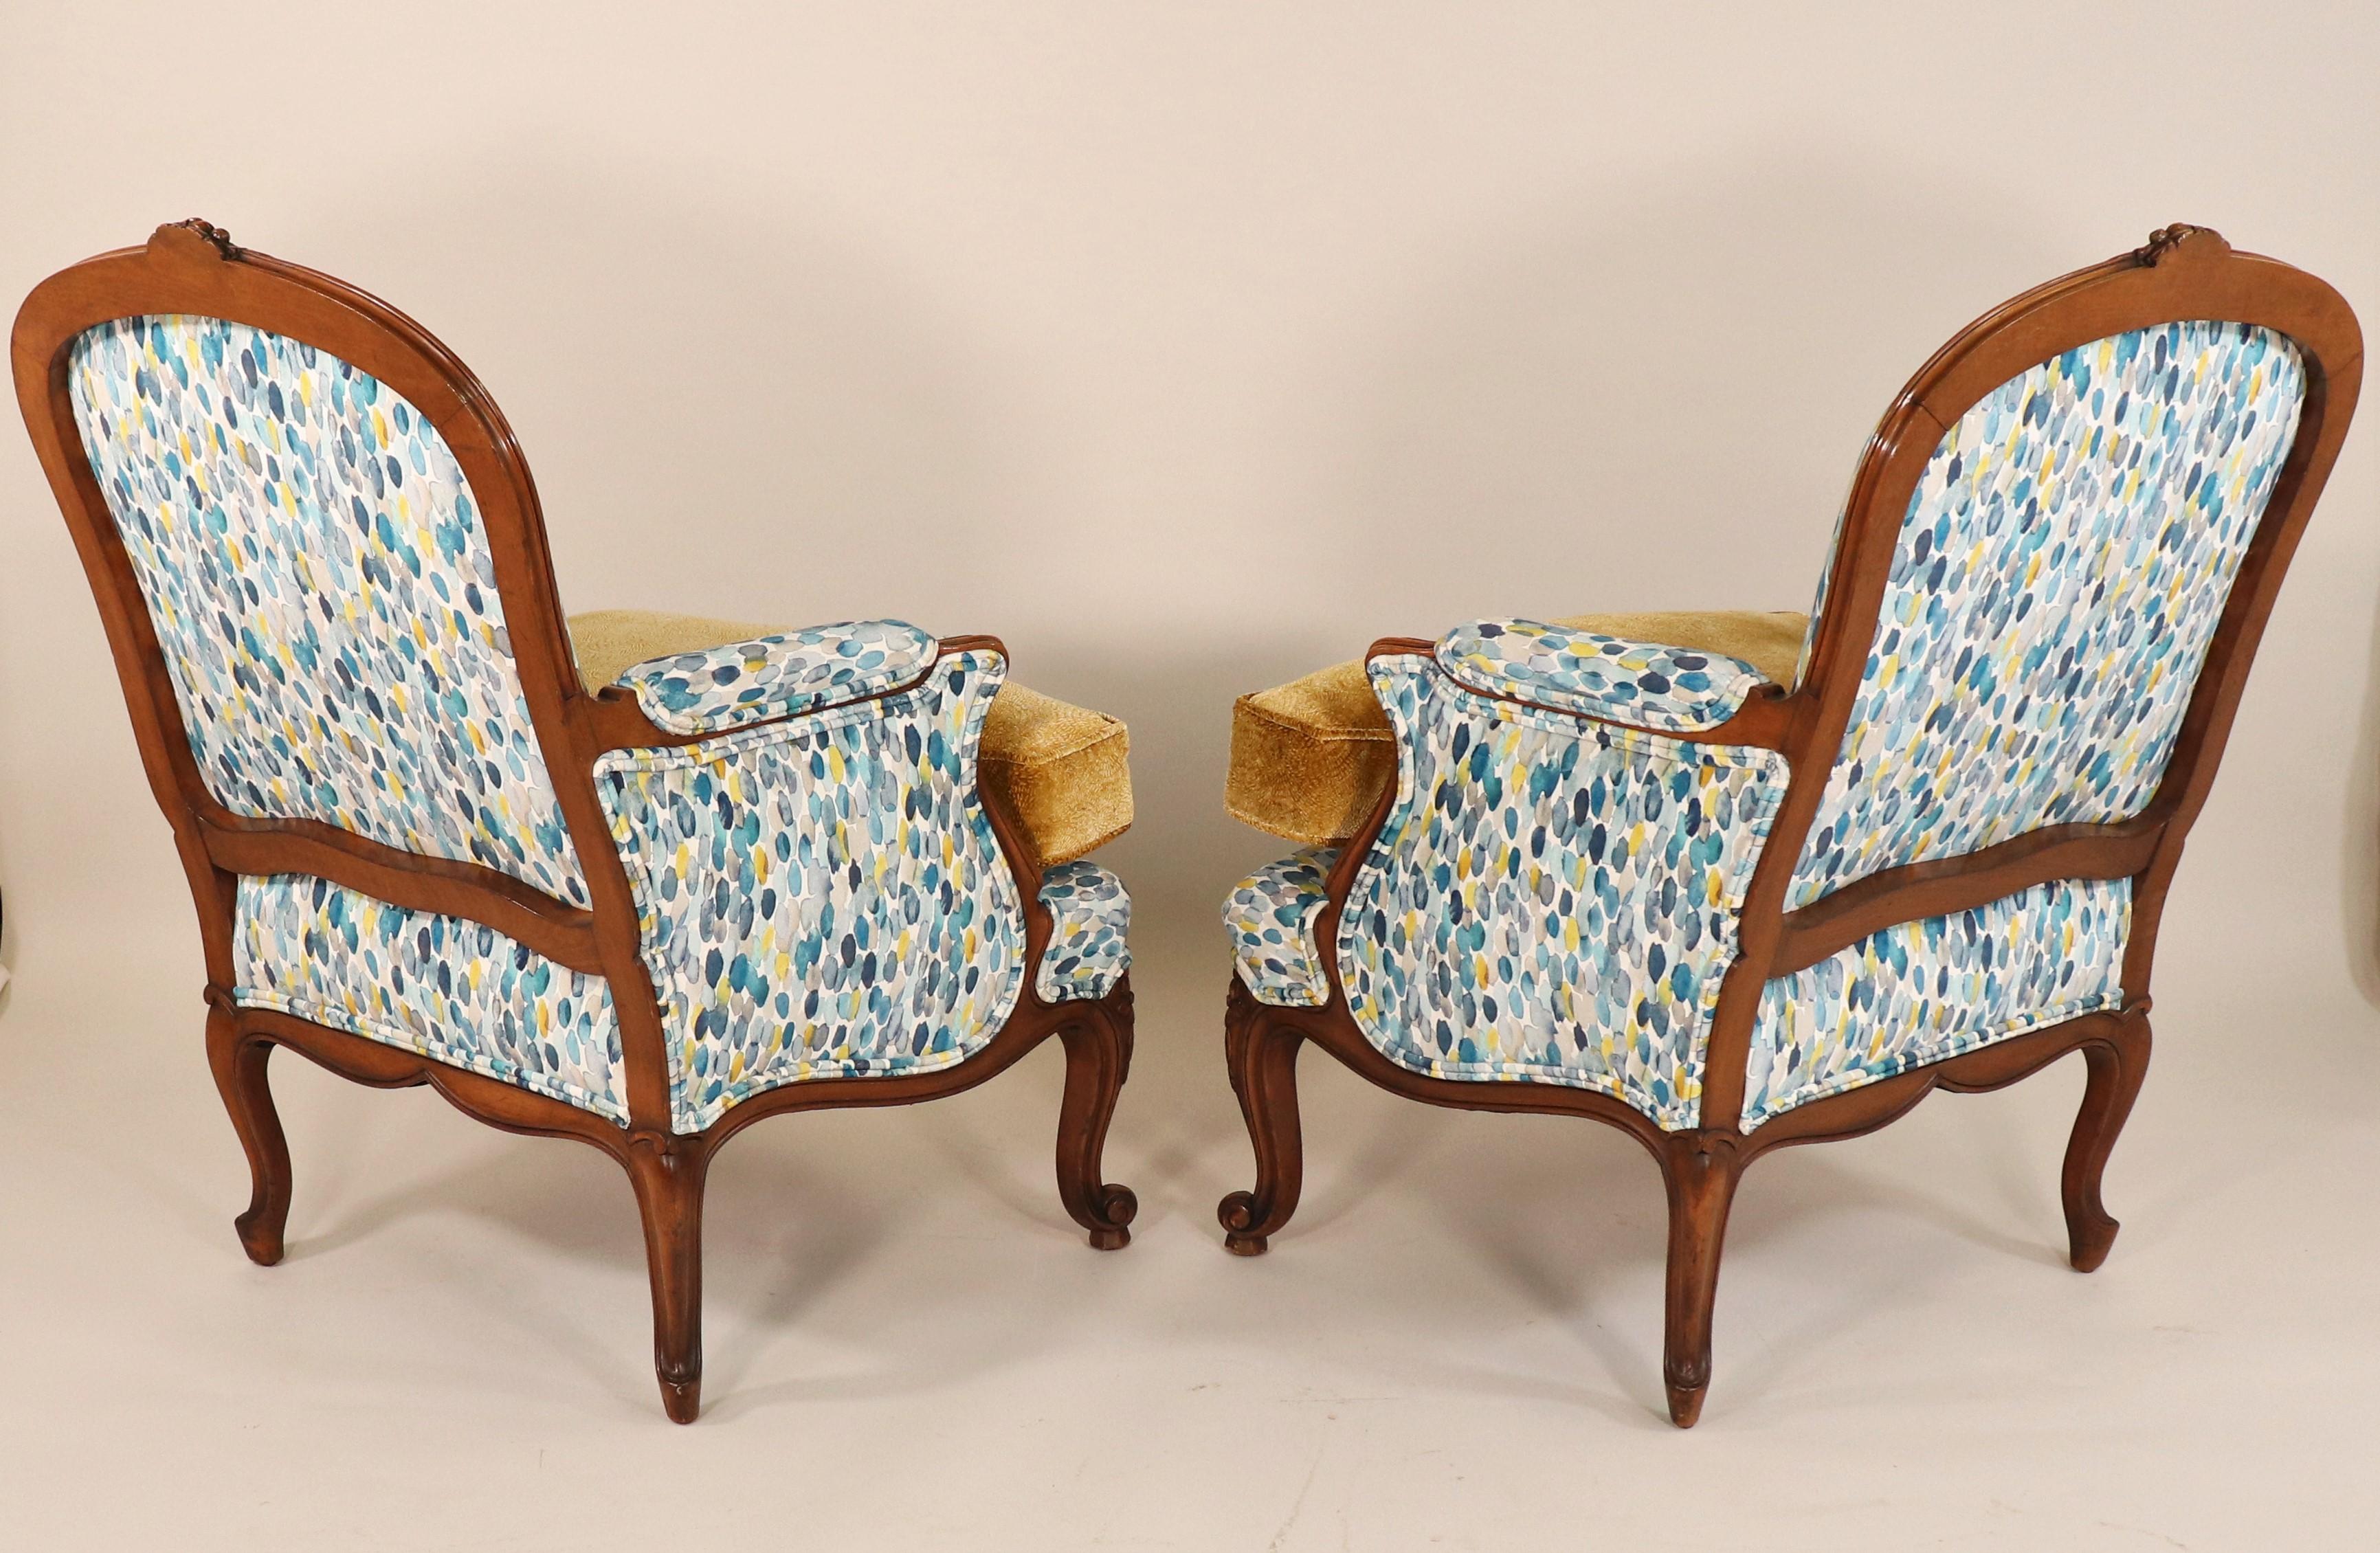 Carved Pair of Mid-19th Century Louis XV Style Bergère Armchairs with Modern Fabrics For Sale